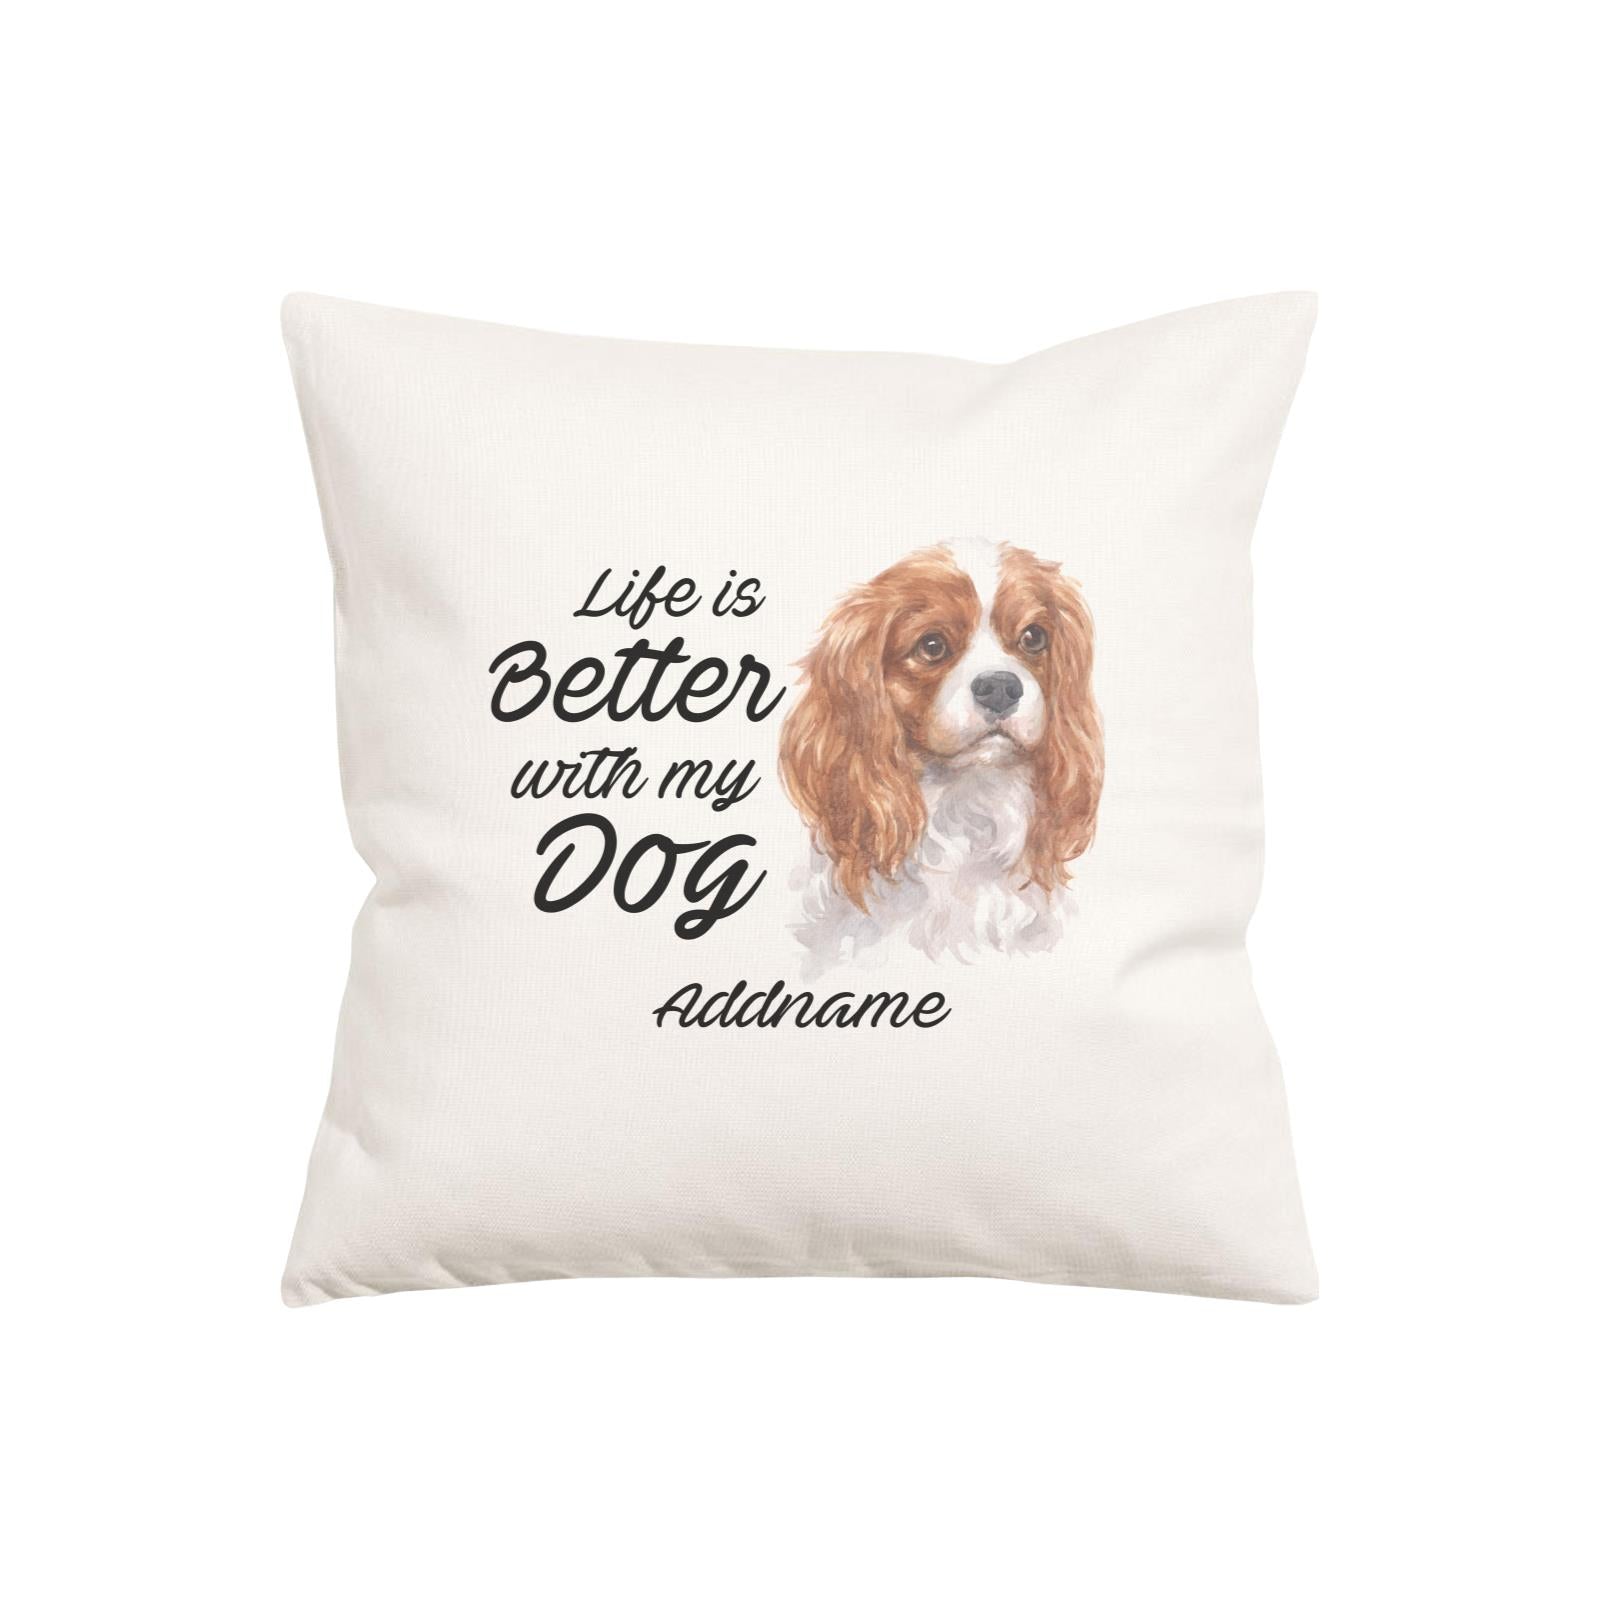 Watercolor Life is Better With My Dog King Charles Spaniel Addname Pillow Cushion